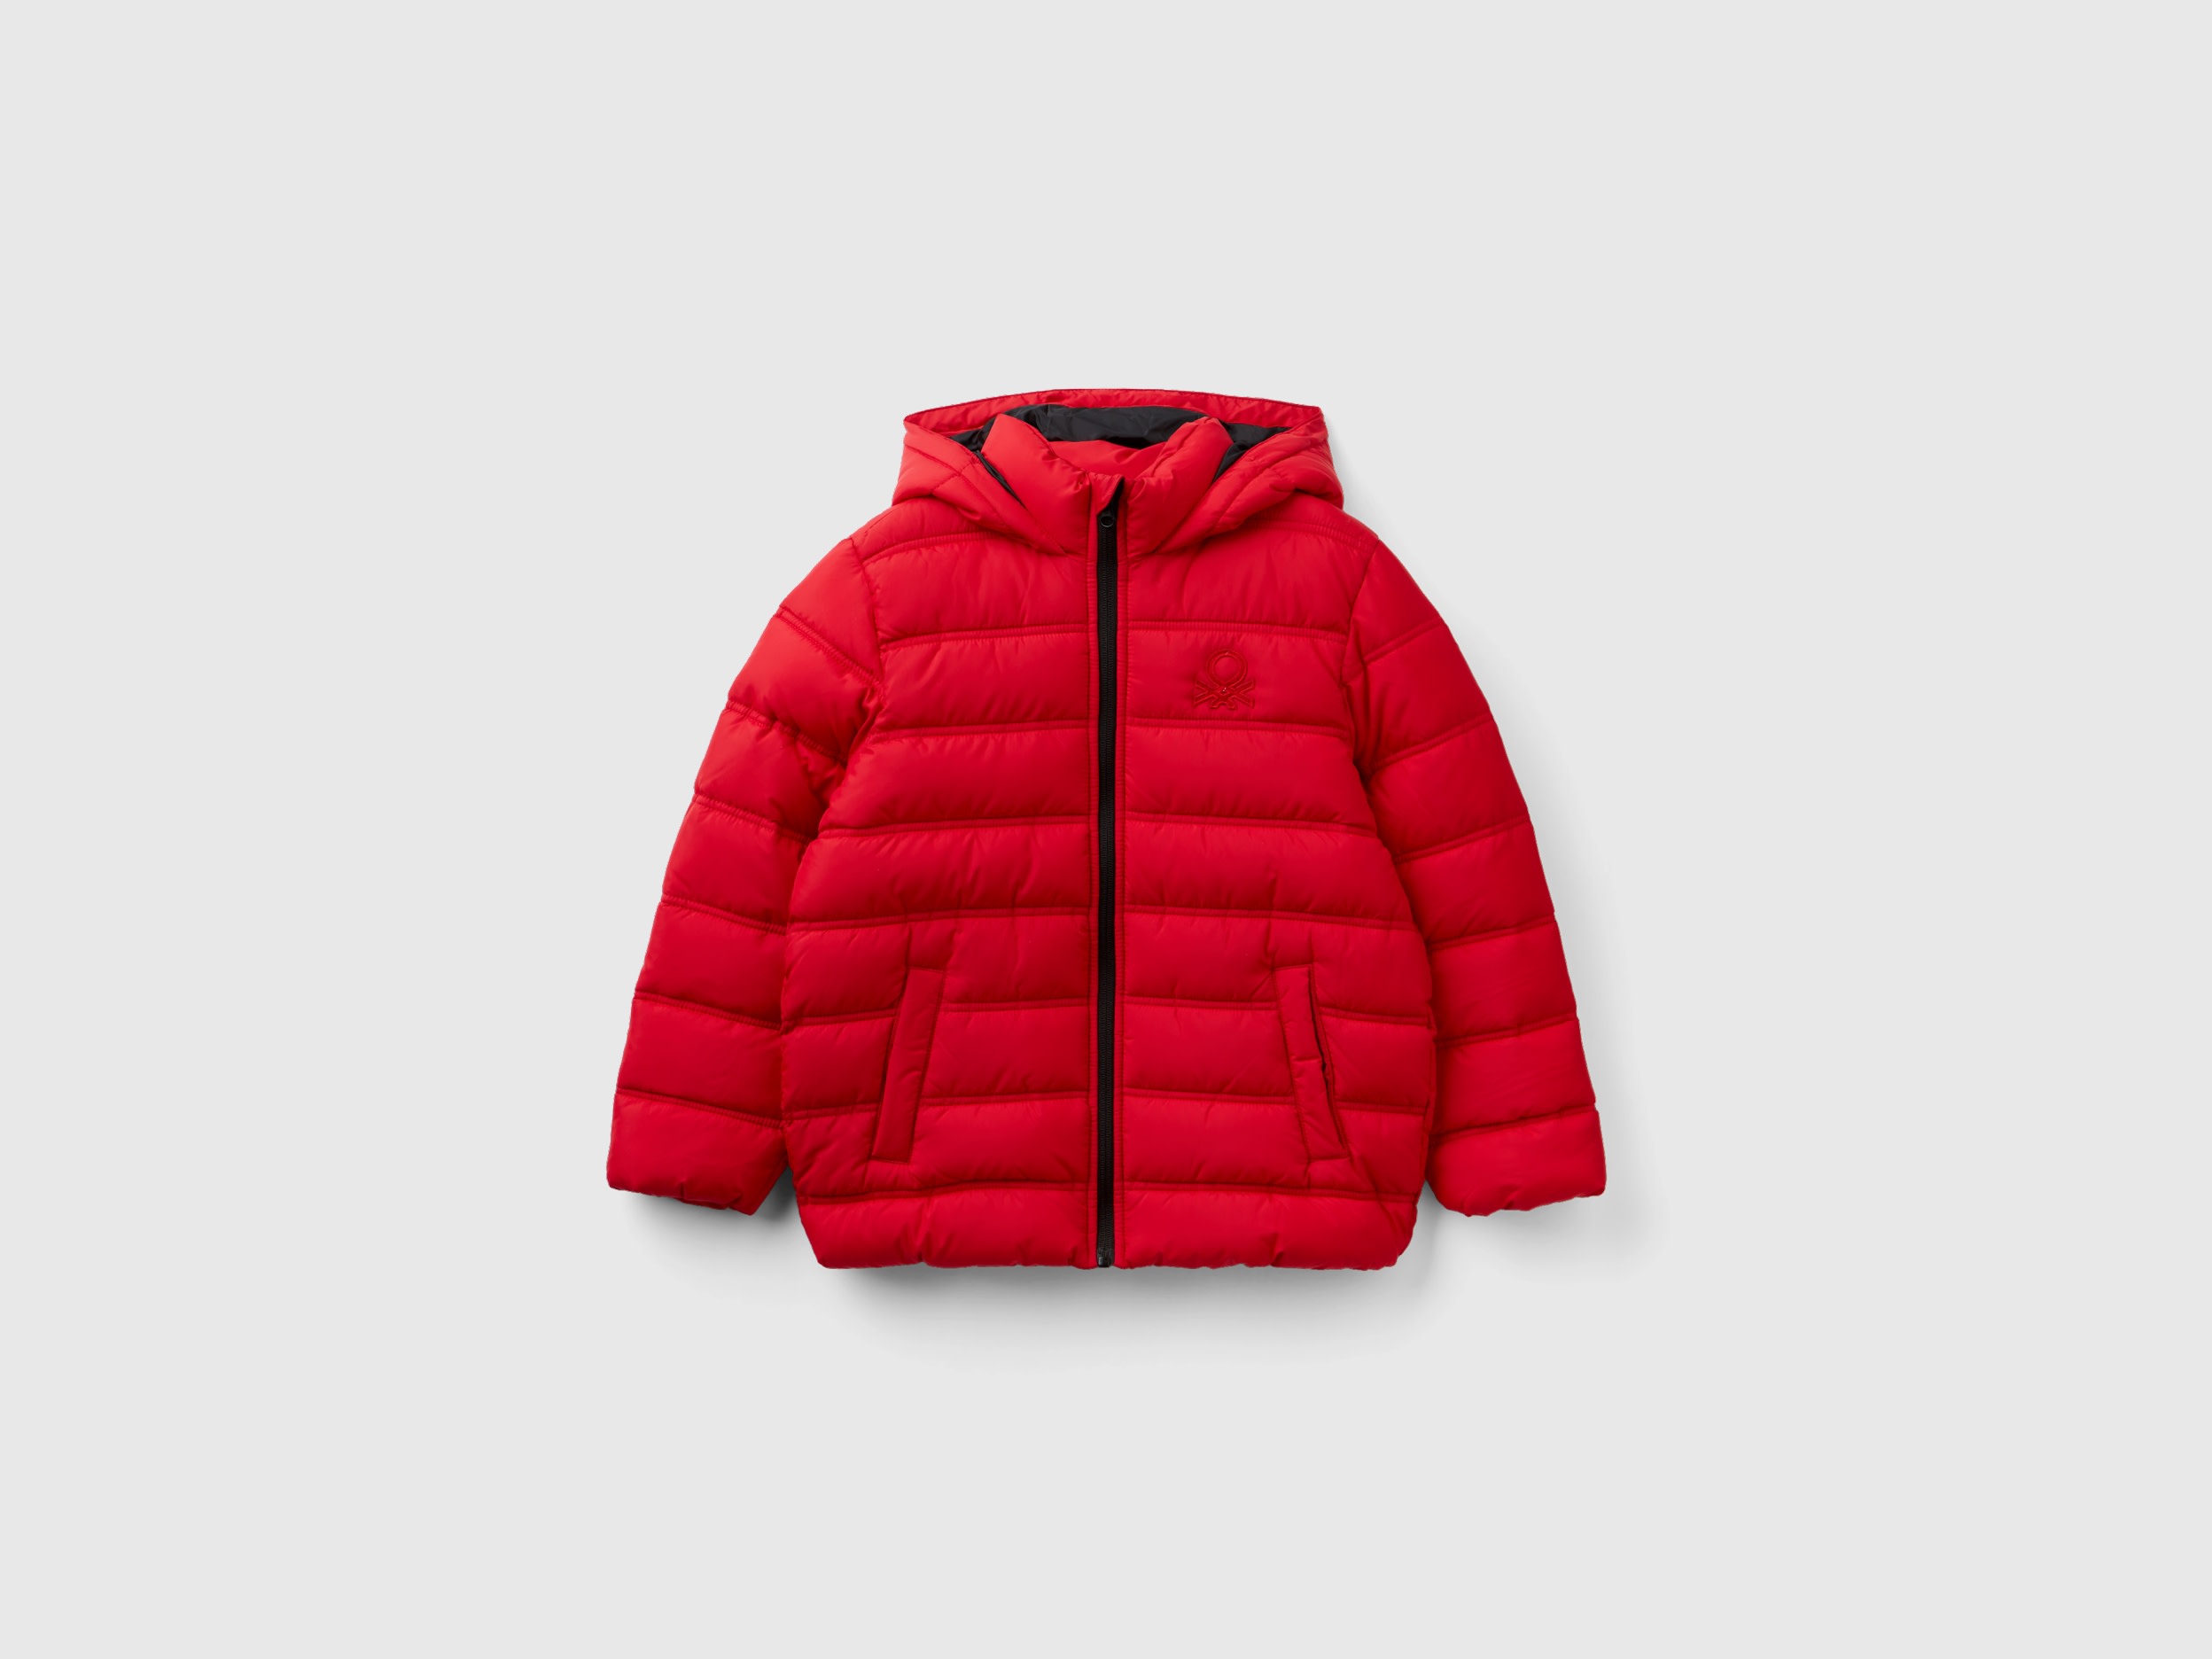 Benetton, Puffer Jacket With Hood And Logo, size M, Red, Kids